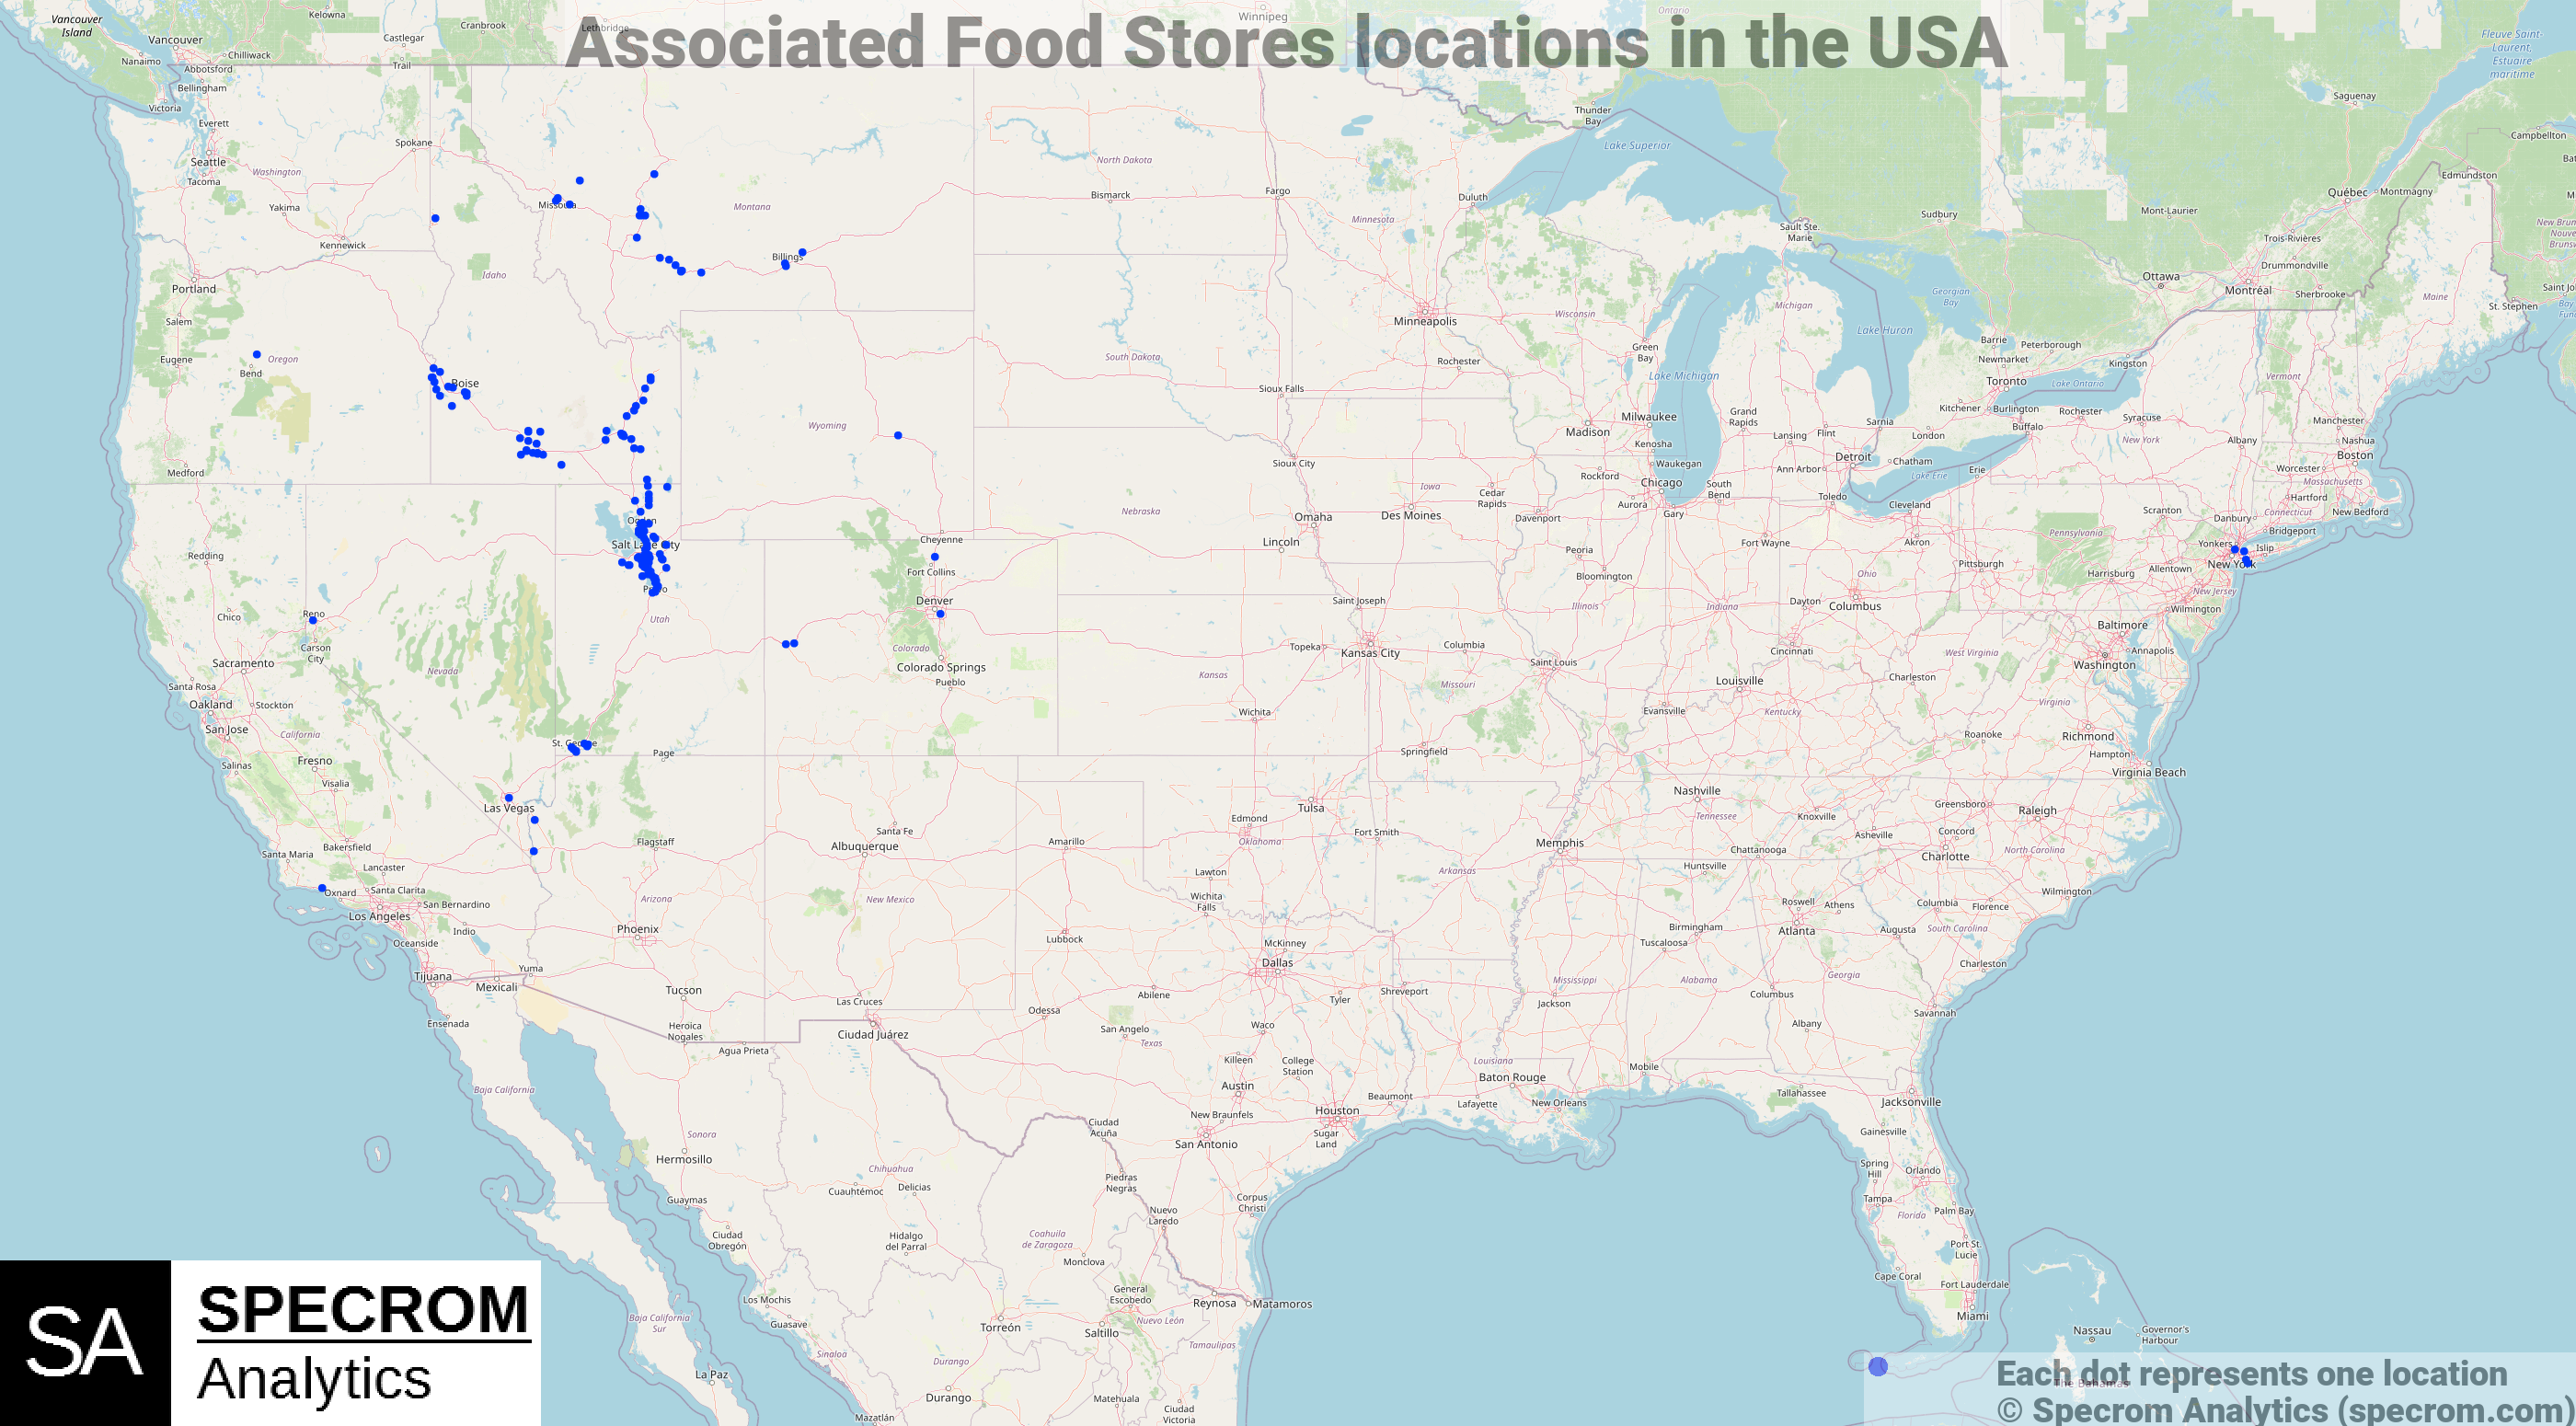 Associated Food Stores locations in the USA